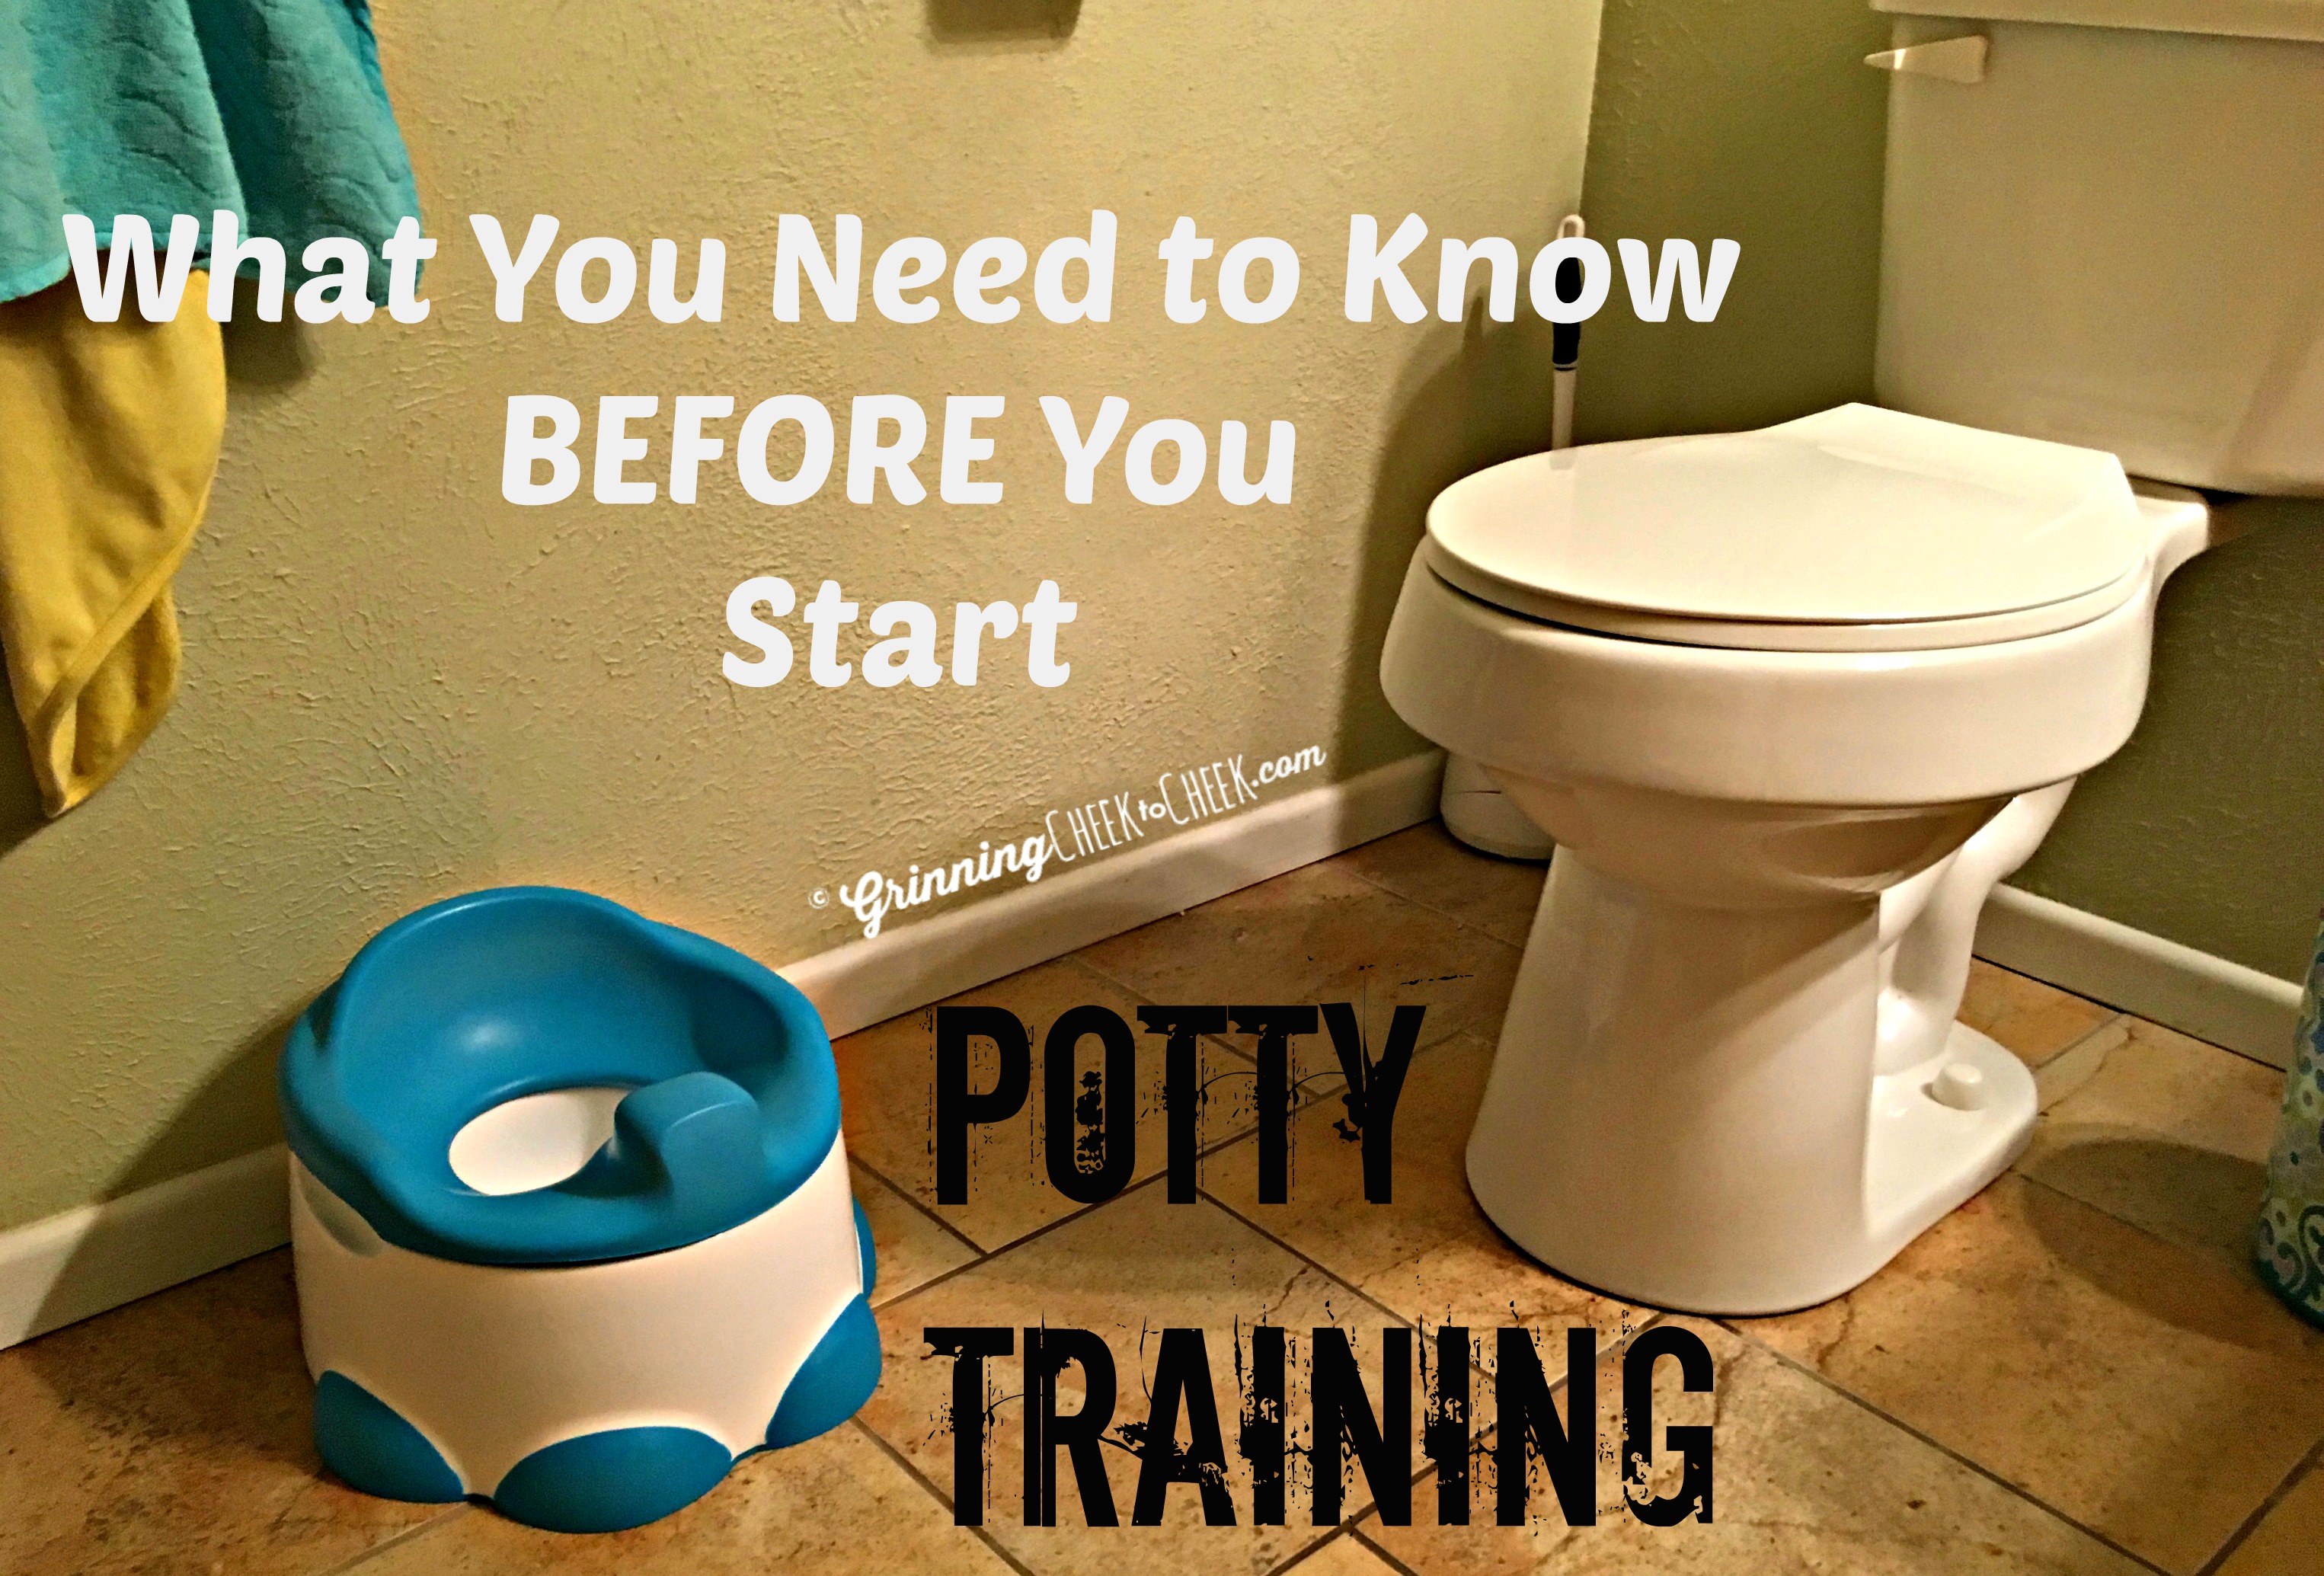 Potty Training Tips – What You Need to Know Before Potty Training #PottyTraining